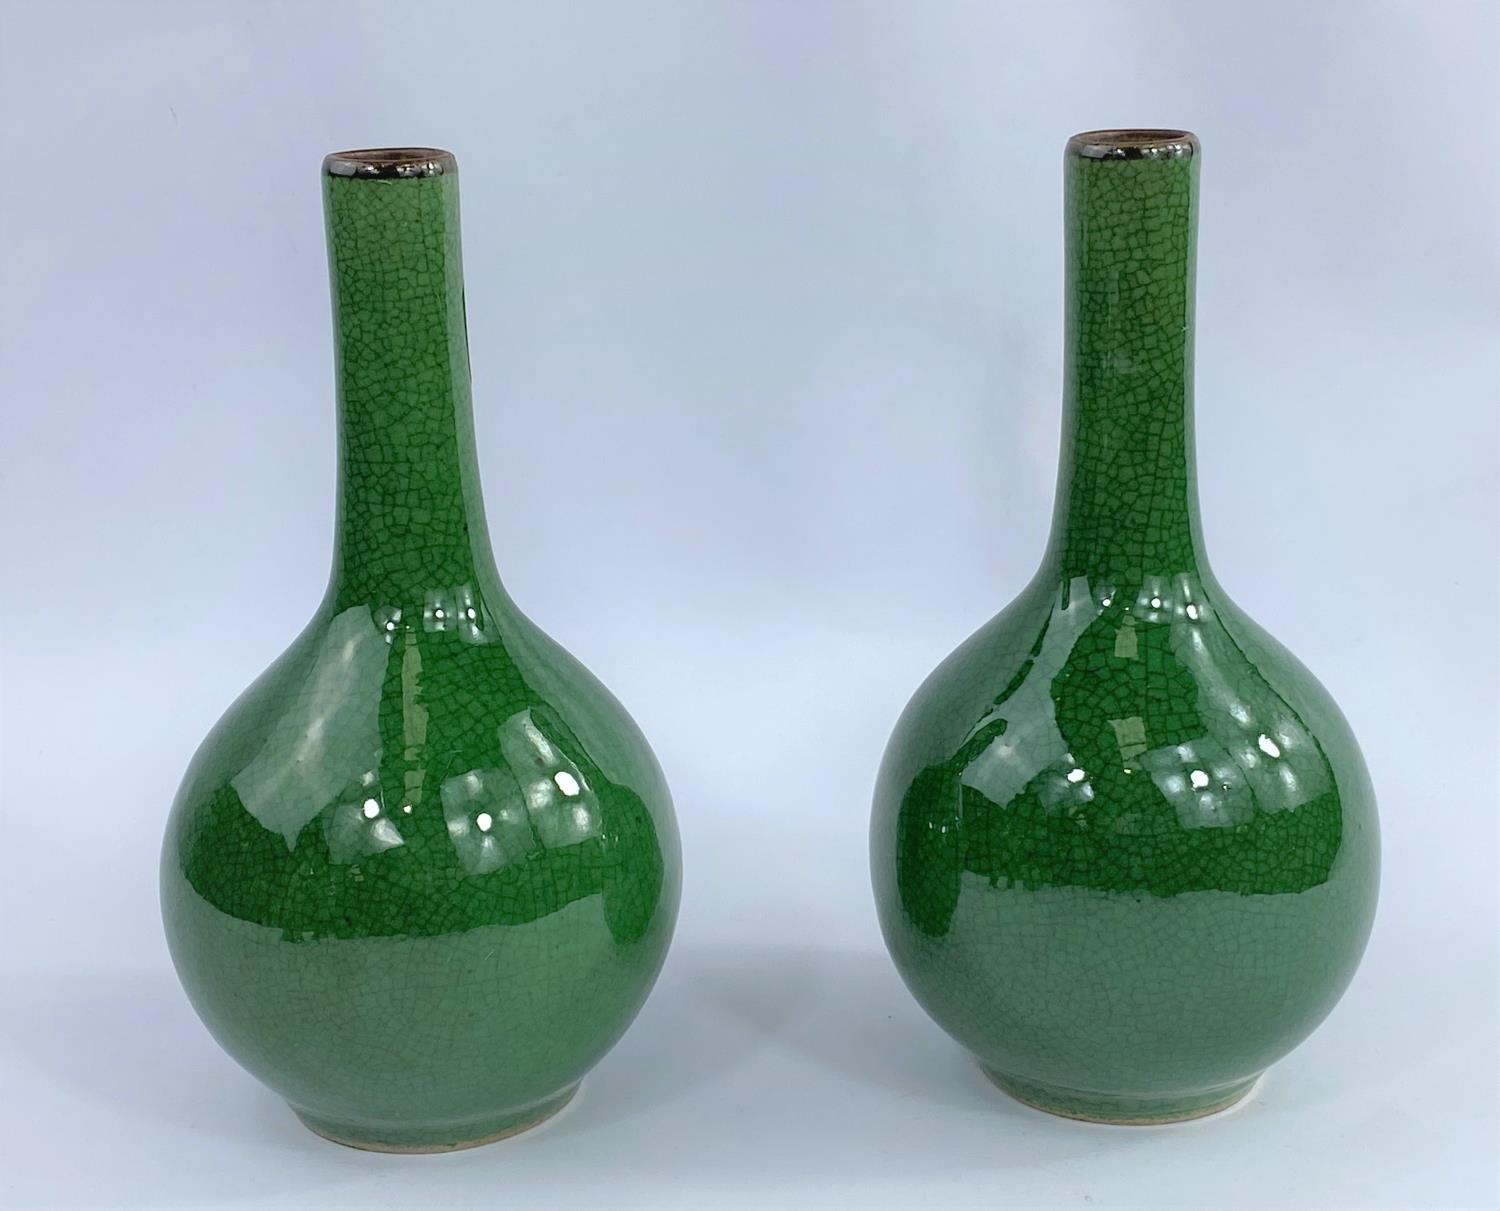 A pair of Chinese monochrome green crackle glaze bottle vases, with slender necks and bulbous